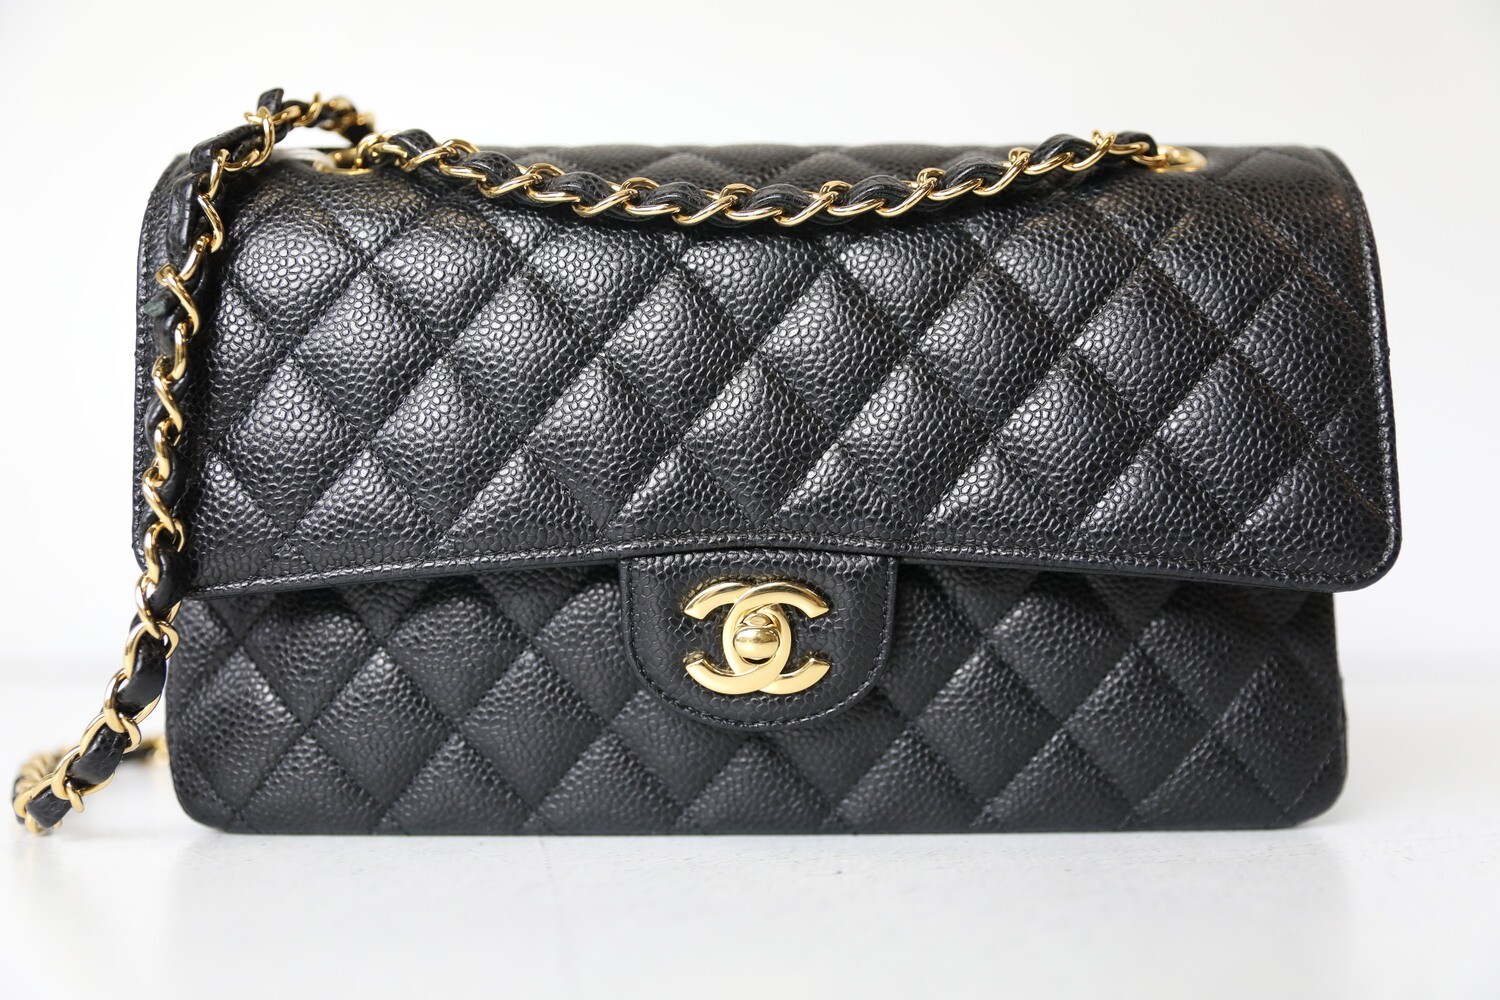 Chanel Classic Medium, Black Caviar with Gold Hardware, Preowned